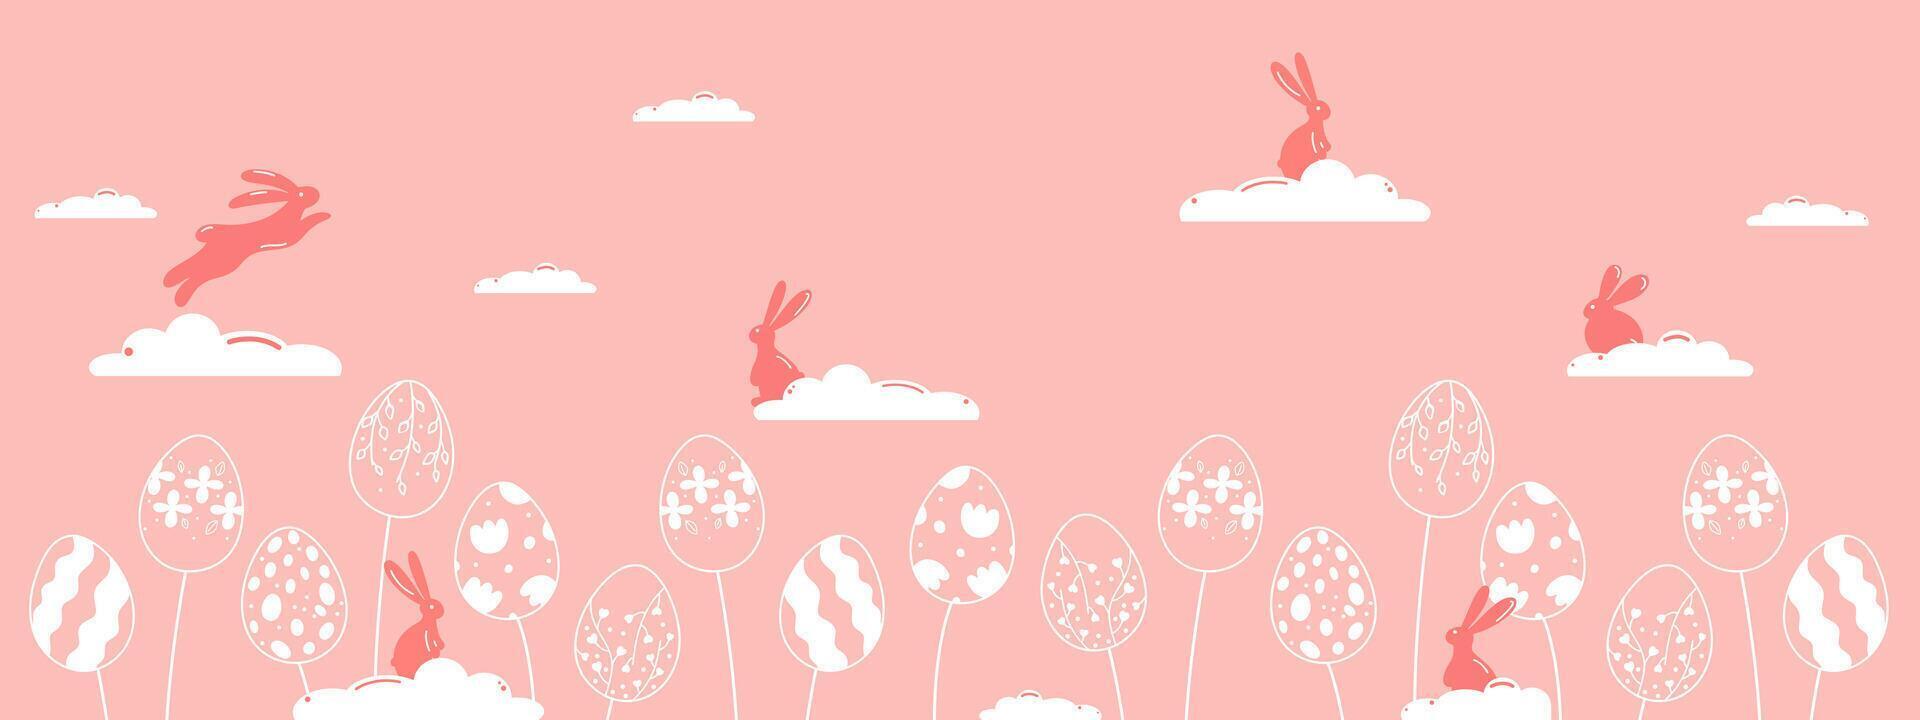 Pink banner for Easter decoration. Silhouettes of Easter bunnies with clouds and eggs in vintage style with floral elements. Unique design for the decoration of Easter goods and web use. vector